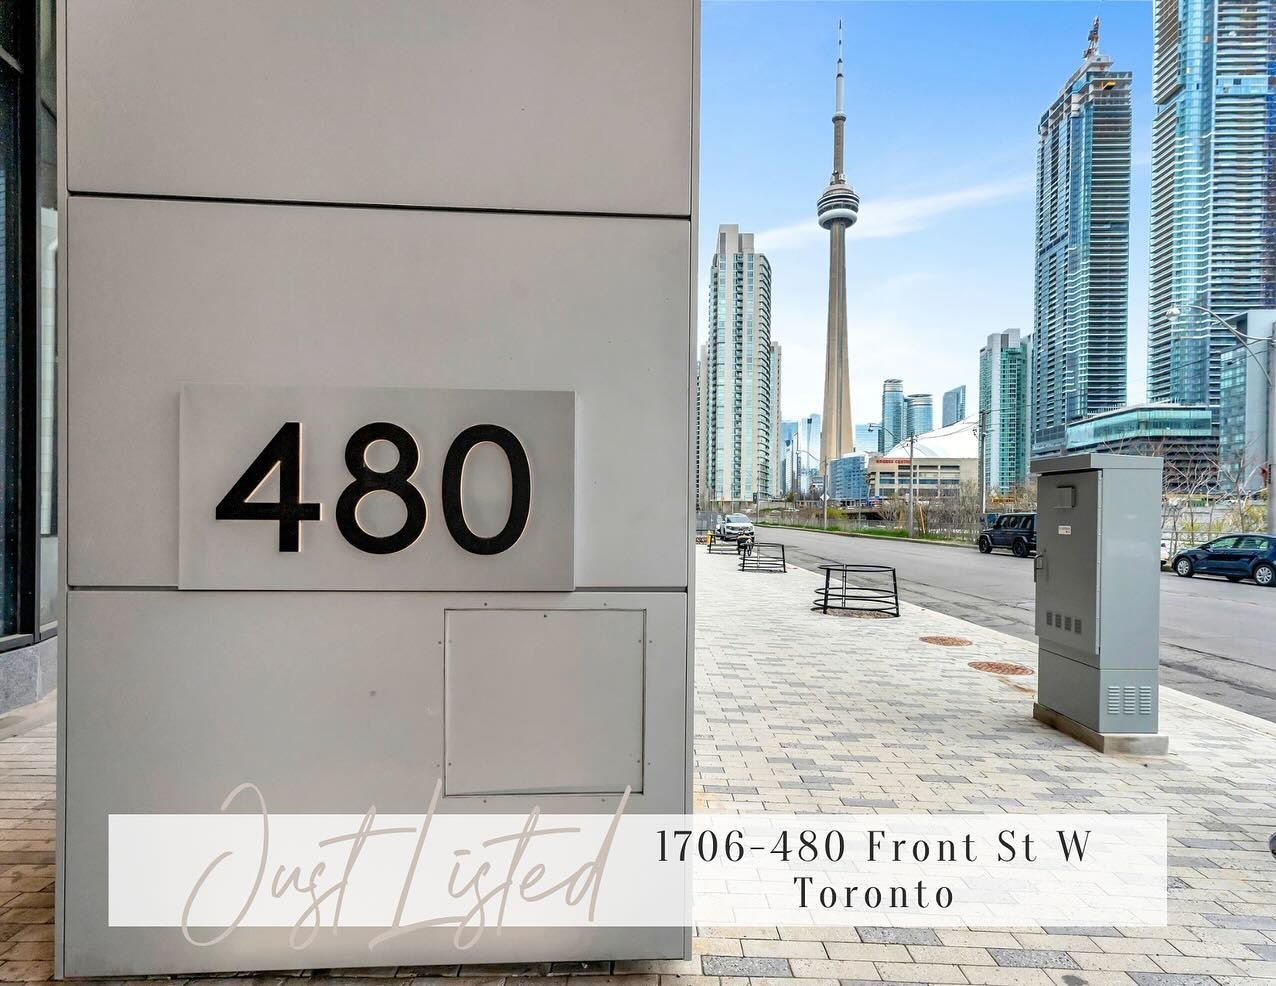 ✨Just Listed✨ 2 bedroom corner unit condo located on the 17th floor at the highly anticipated development, The Well!

🛏️ 2 bedrooms
🛁 2 full bathrooms 
🍽️ modern kitchen w quartz island
🏙️ large balcony with city views 
🧺 in suite laundry 
🚗 1 